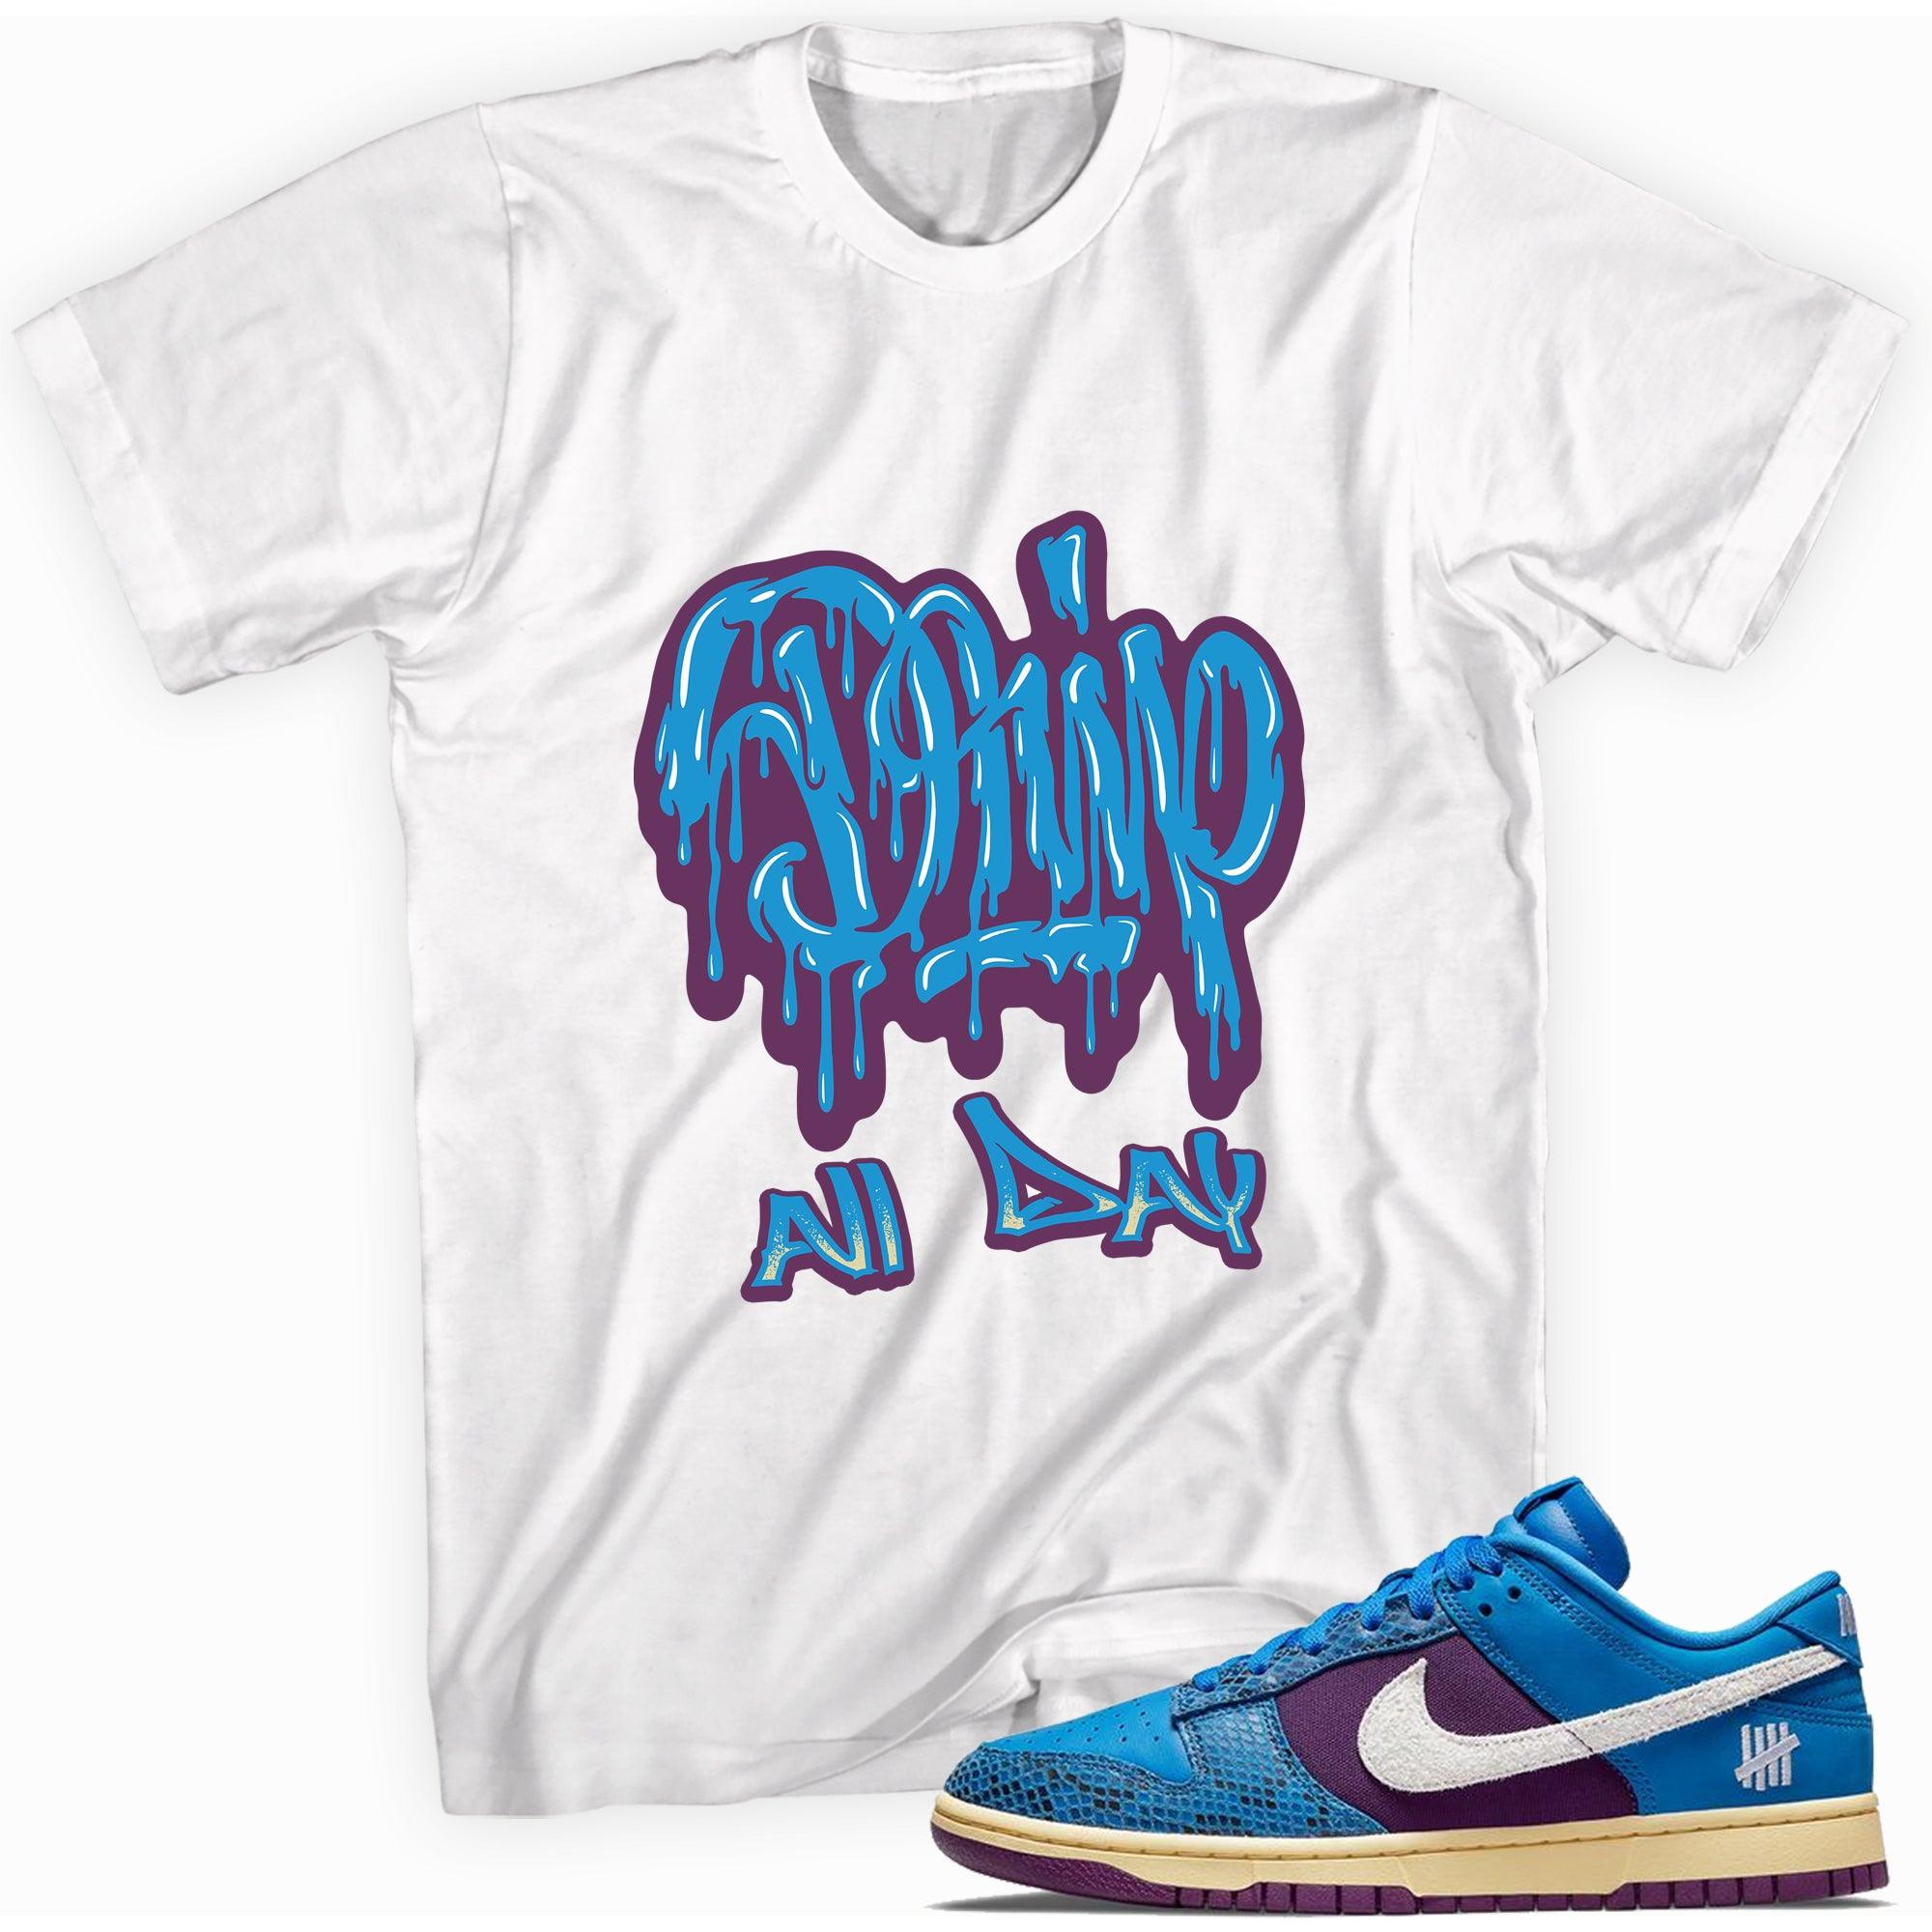 Drip All Day Shirt Nike Dunk Low Undefeated 5 On It Dunk vs AF1 photo